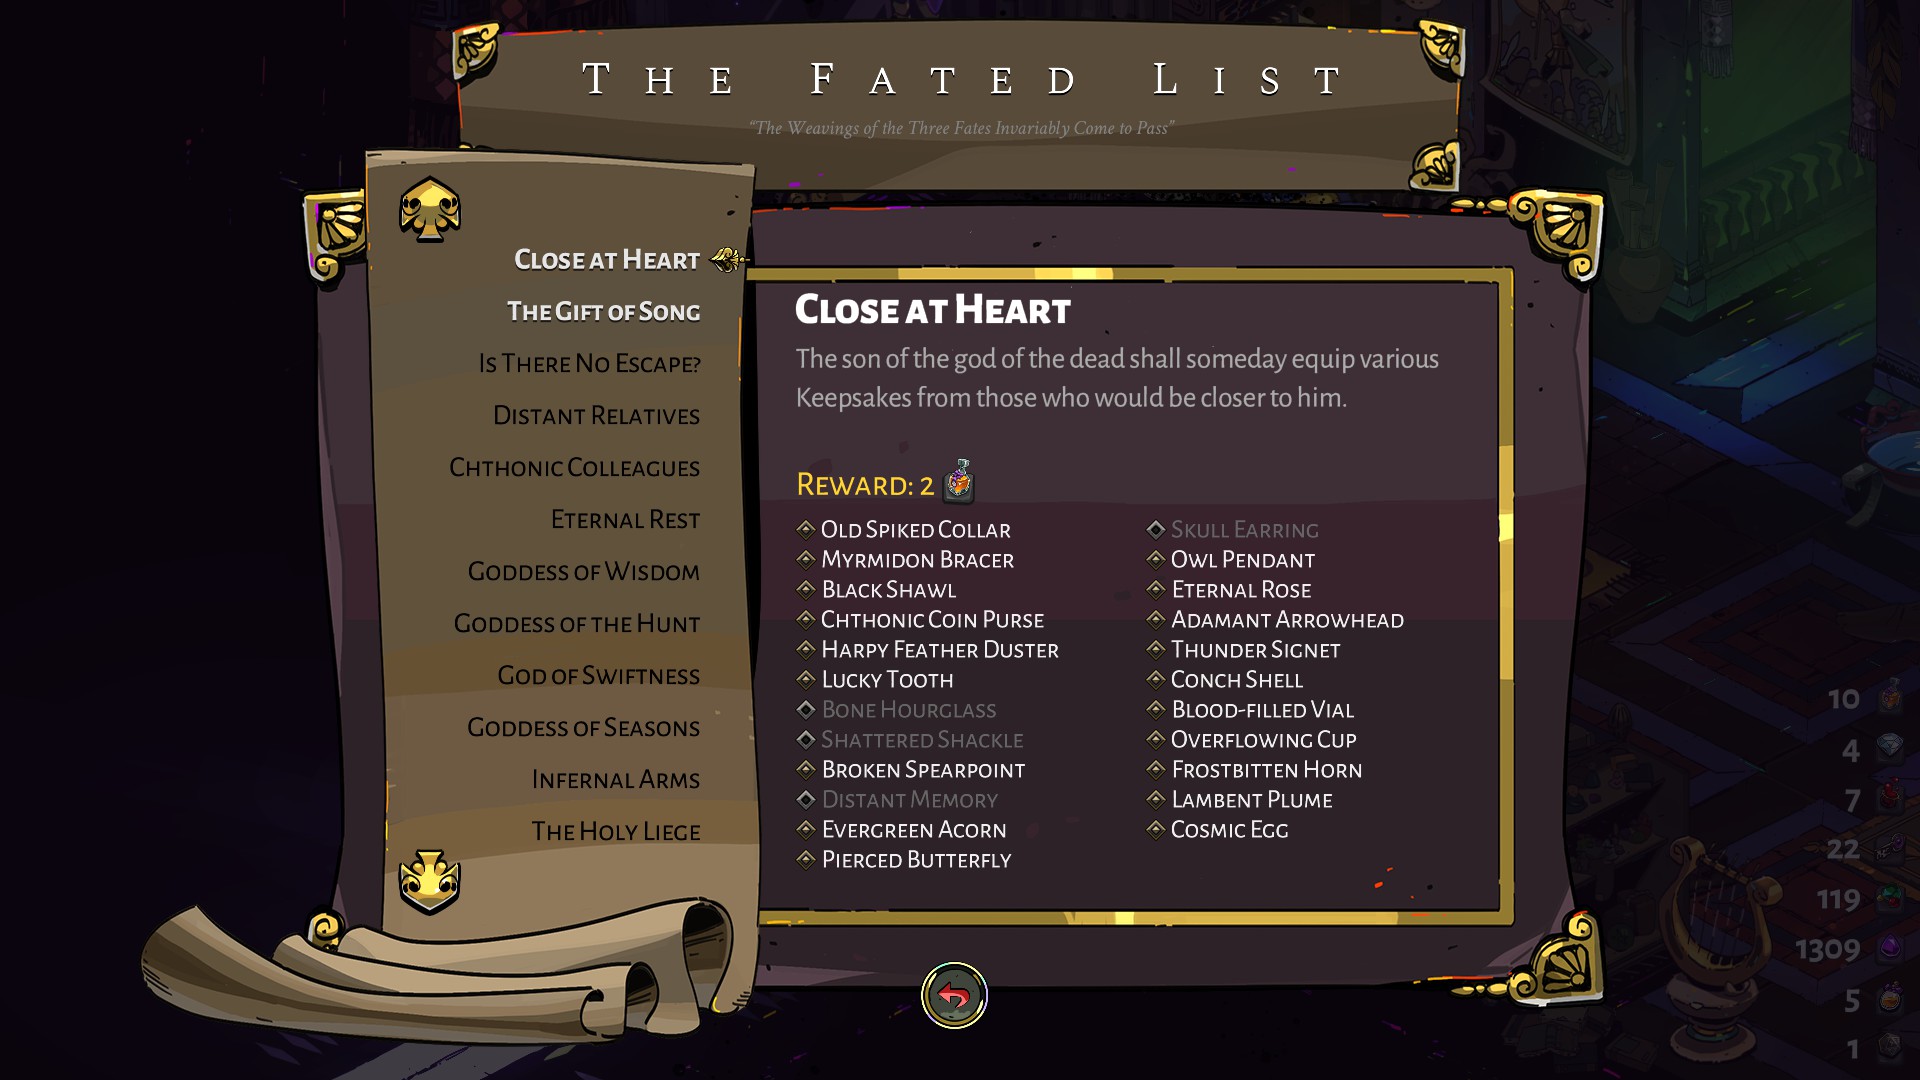 Fated List objectives presented as a scroll.